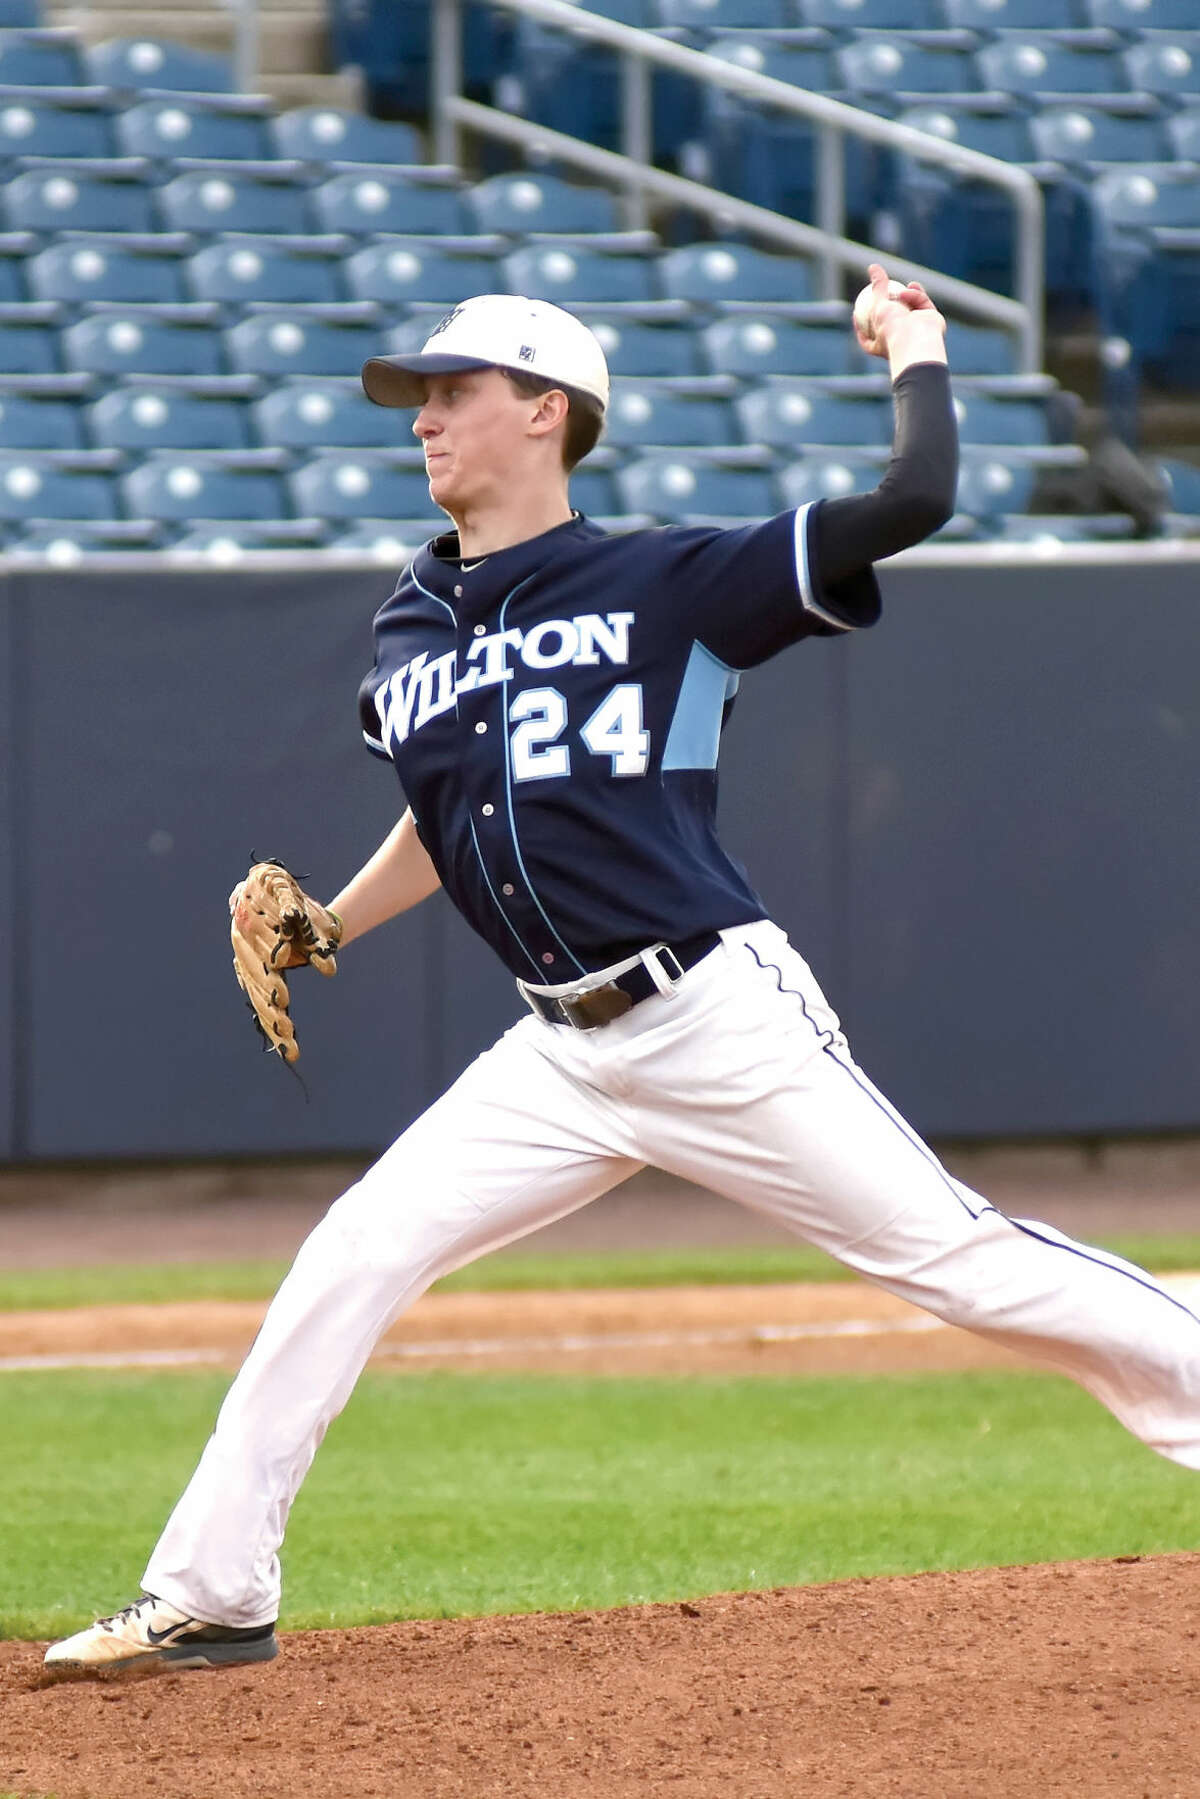 JT Morin is one of eight players from Wilton who will play college baseball in the fall. (John Nash/Hour photo)